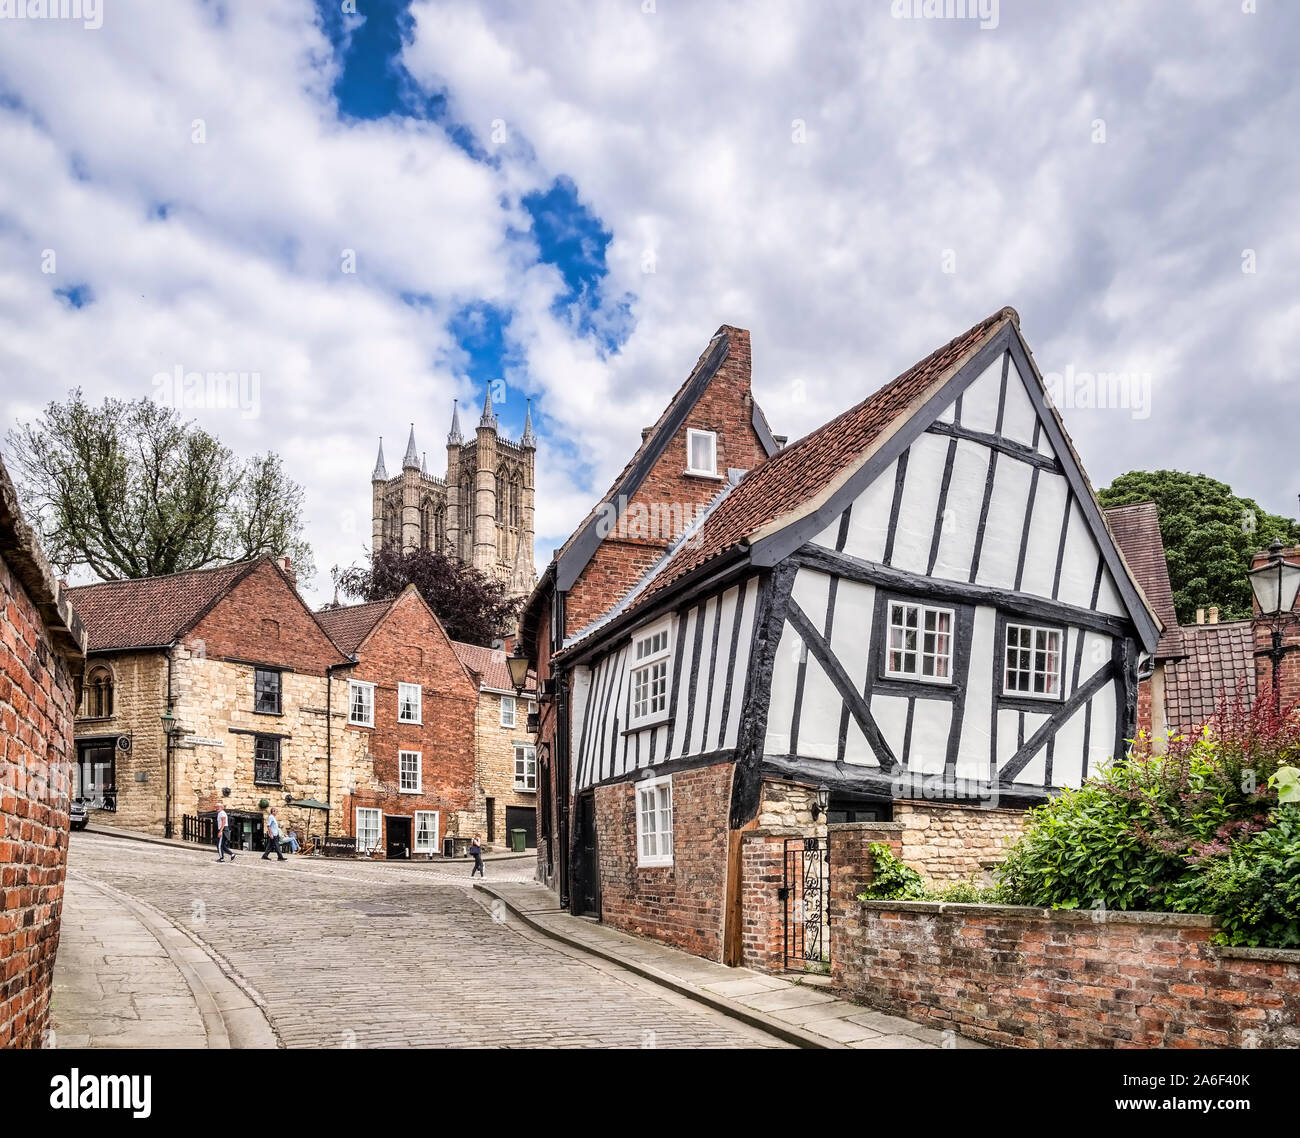 2 July 2019: Lincoln, Lincolnshire, UK - Crooked half-timbered house in Michaelgate, Lincoln. Stock Photo